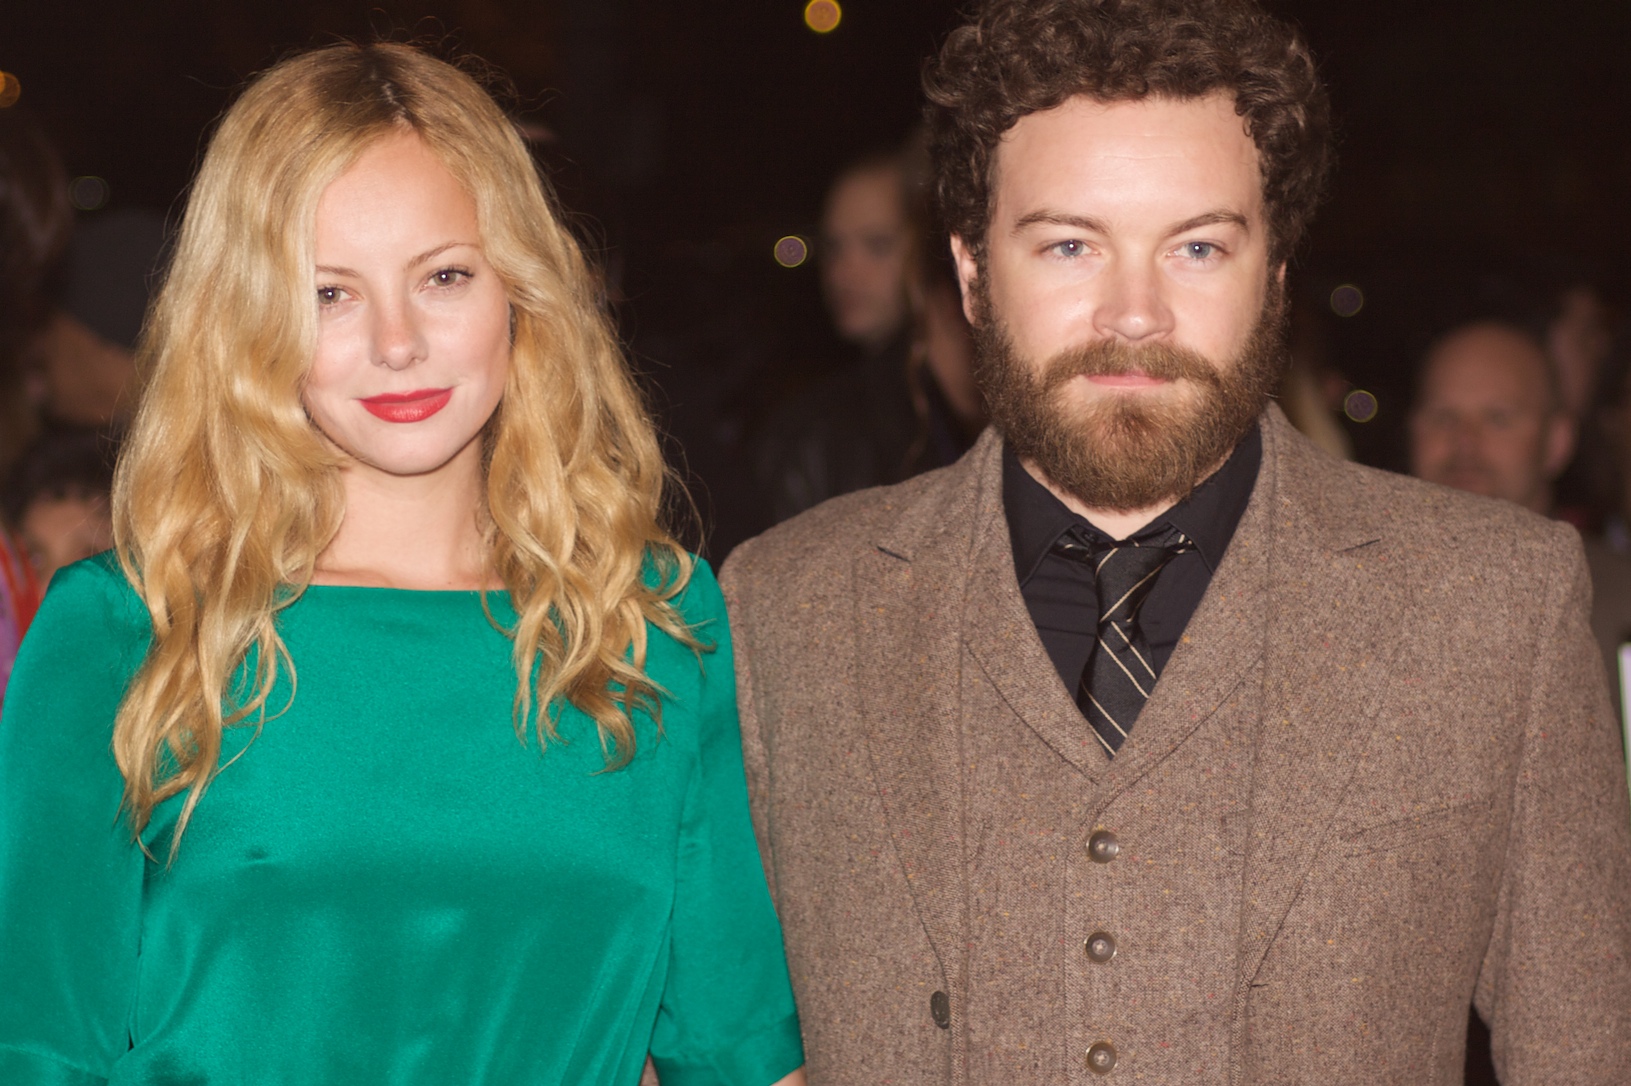 Danny Masterson and wife Bijou Phillips on the red carpet. Source: Inside Cinequest, Flickr